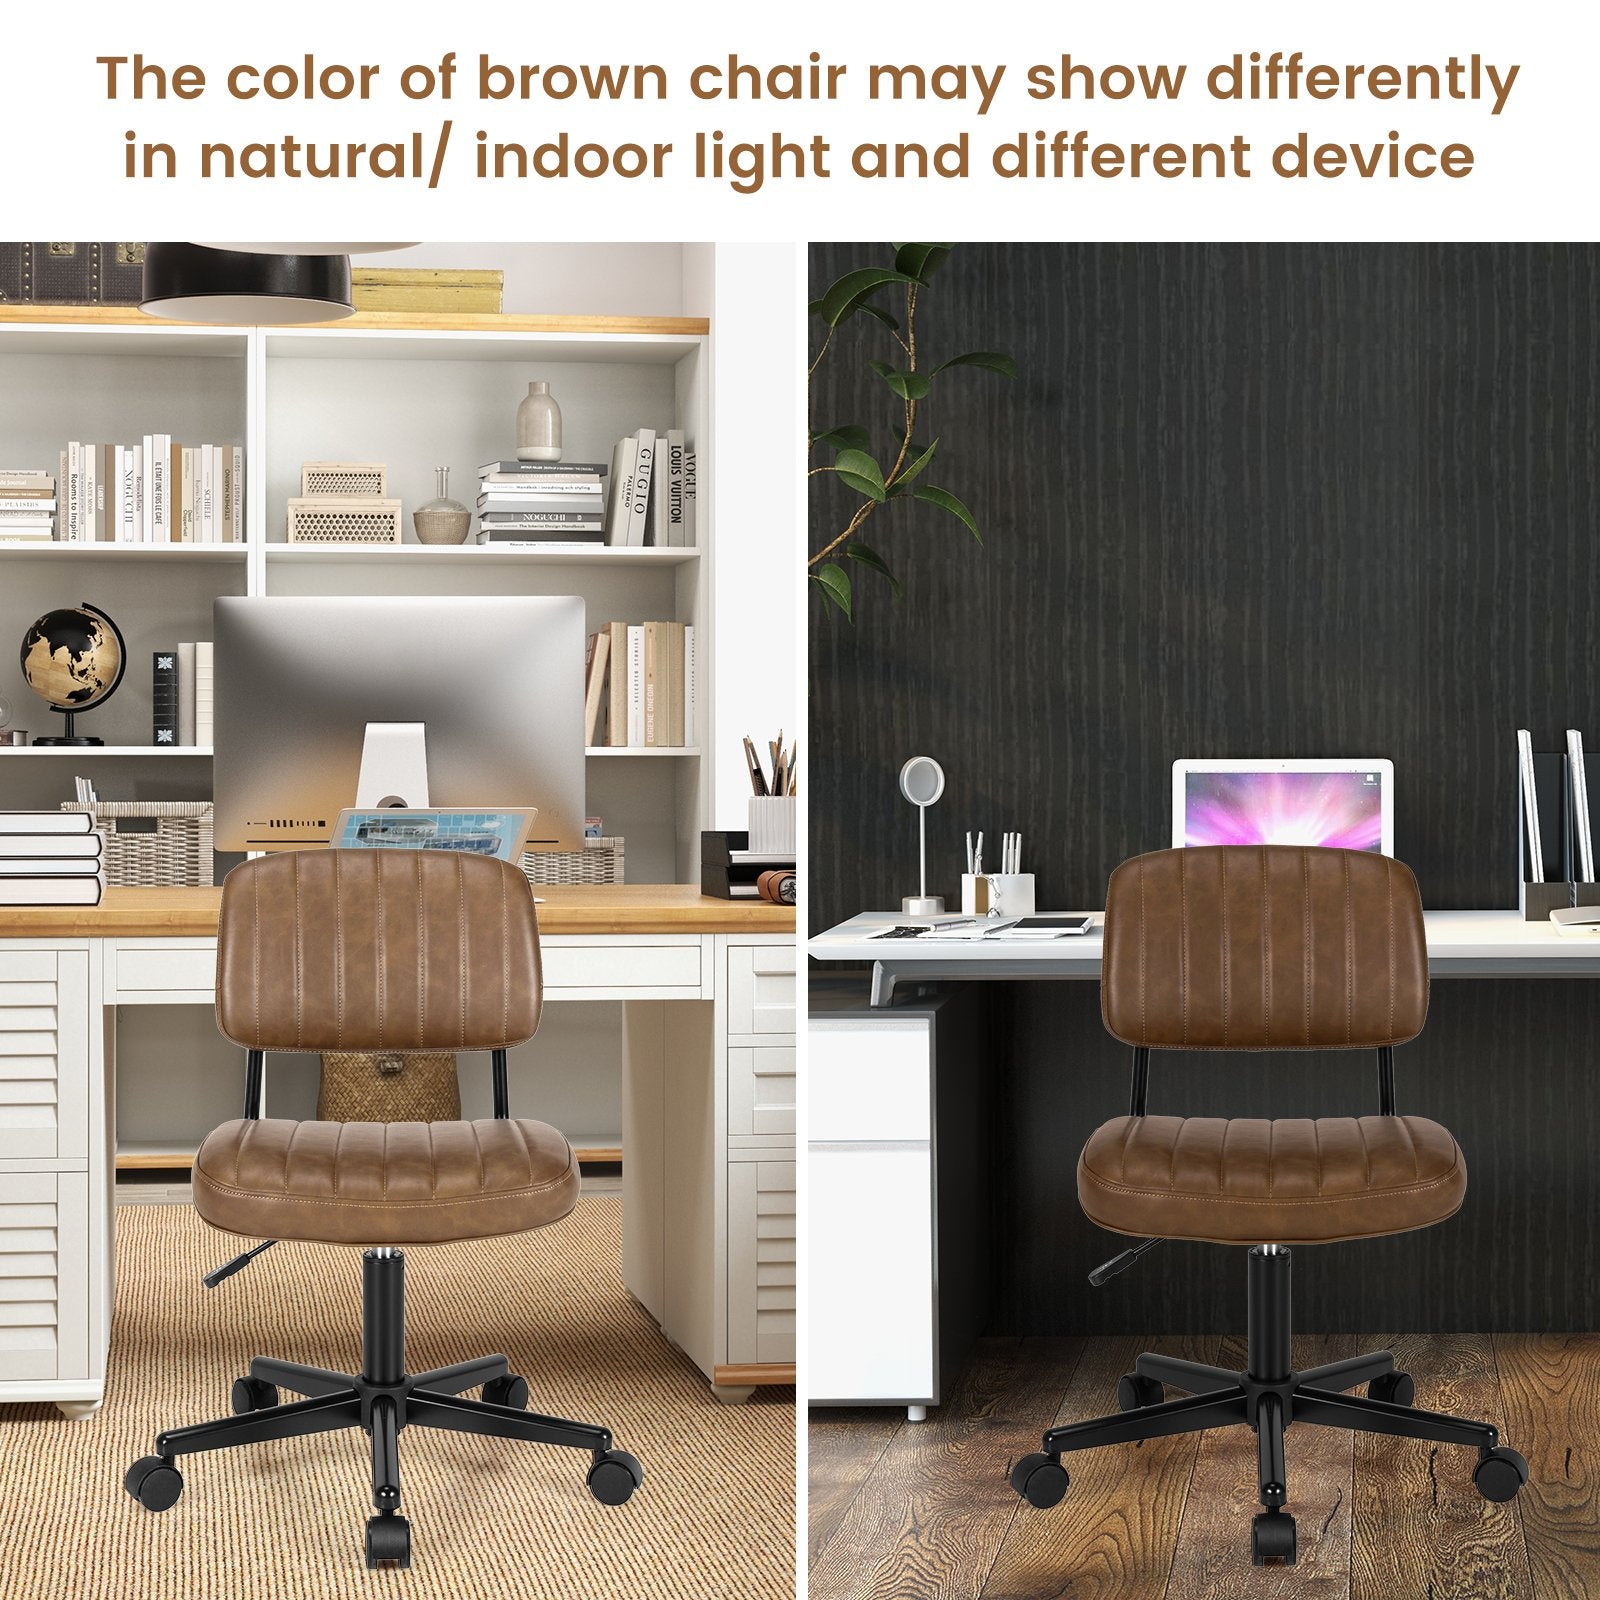 PU Leather Adjustable Office Chair  Swivel Task Chair with Backrest, Brown - Gallery Canada